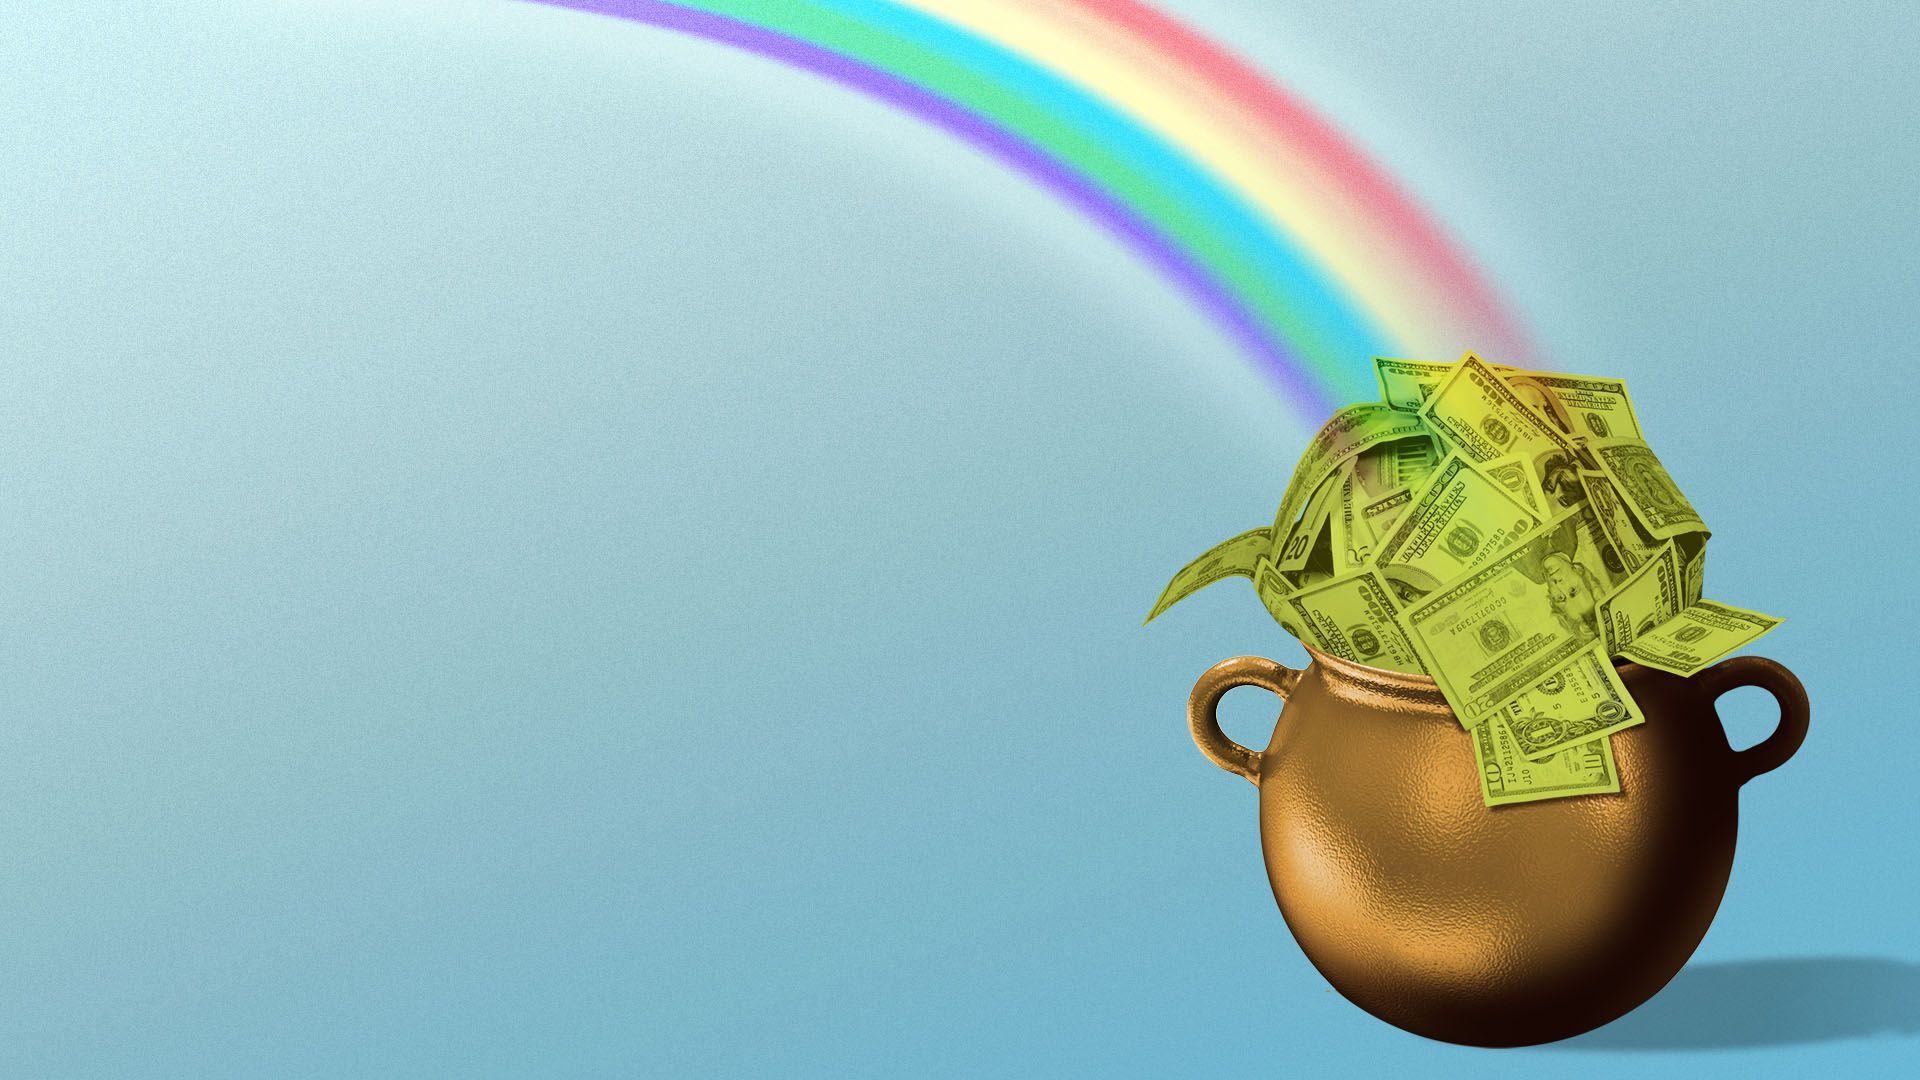 Illustration of a golden cauldron filled with money at the end of a rainbow 